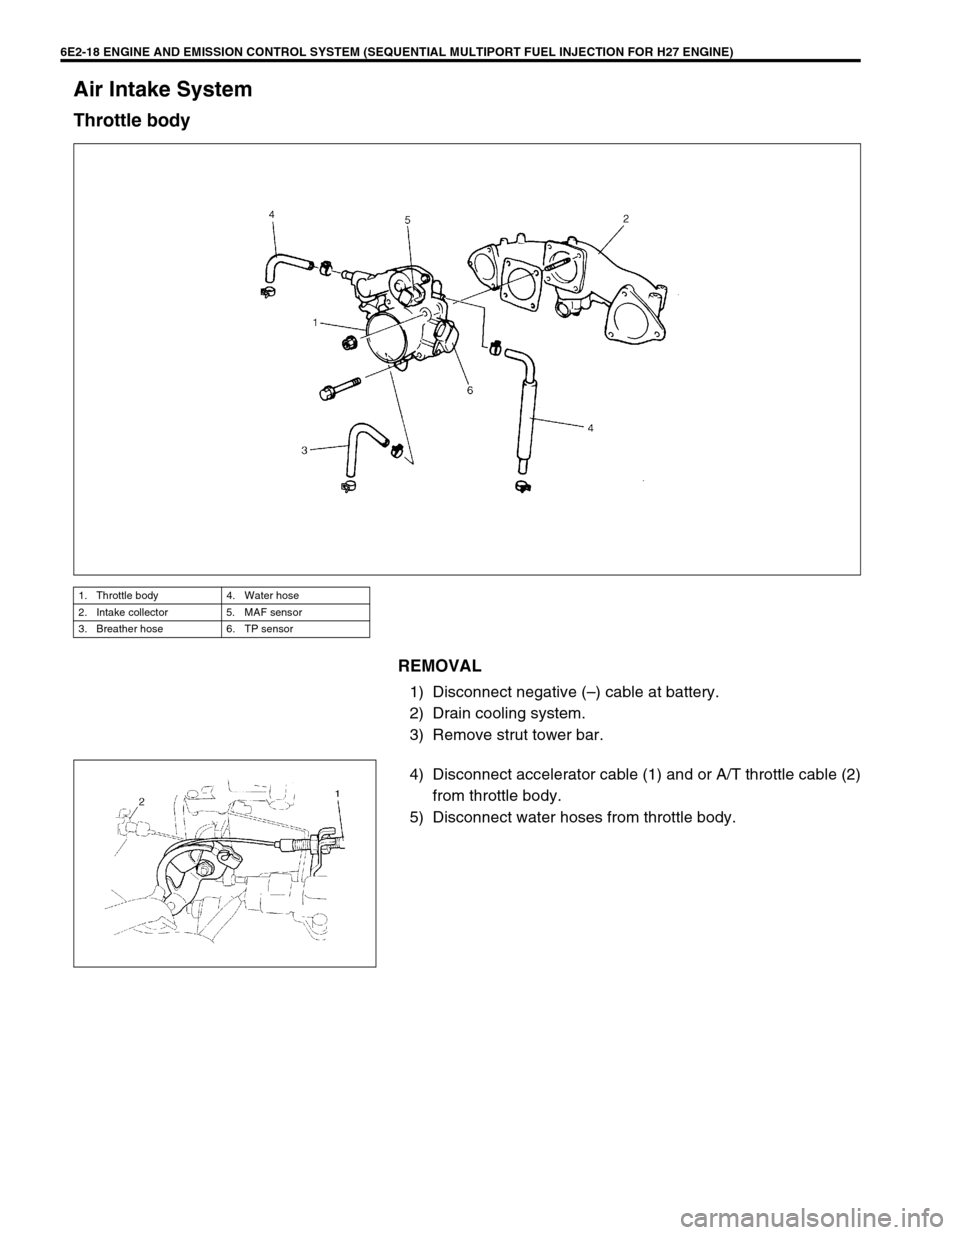 SUZUKI GRAND VITARA 2001 2.G Owners Manual 6E2-18 ENGINE AND EMISSION CONTROL SYSTEM (SEQUENTIAL MULTIPORT FUEL INJECTION FOR H27 ENGINE)
Air Intake System
Throttle body
REMOVAL
1) Disconnect negative (–) cable at battery.
2) Drain cooling s